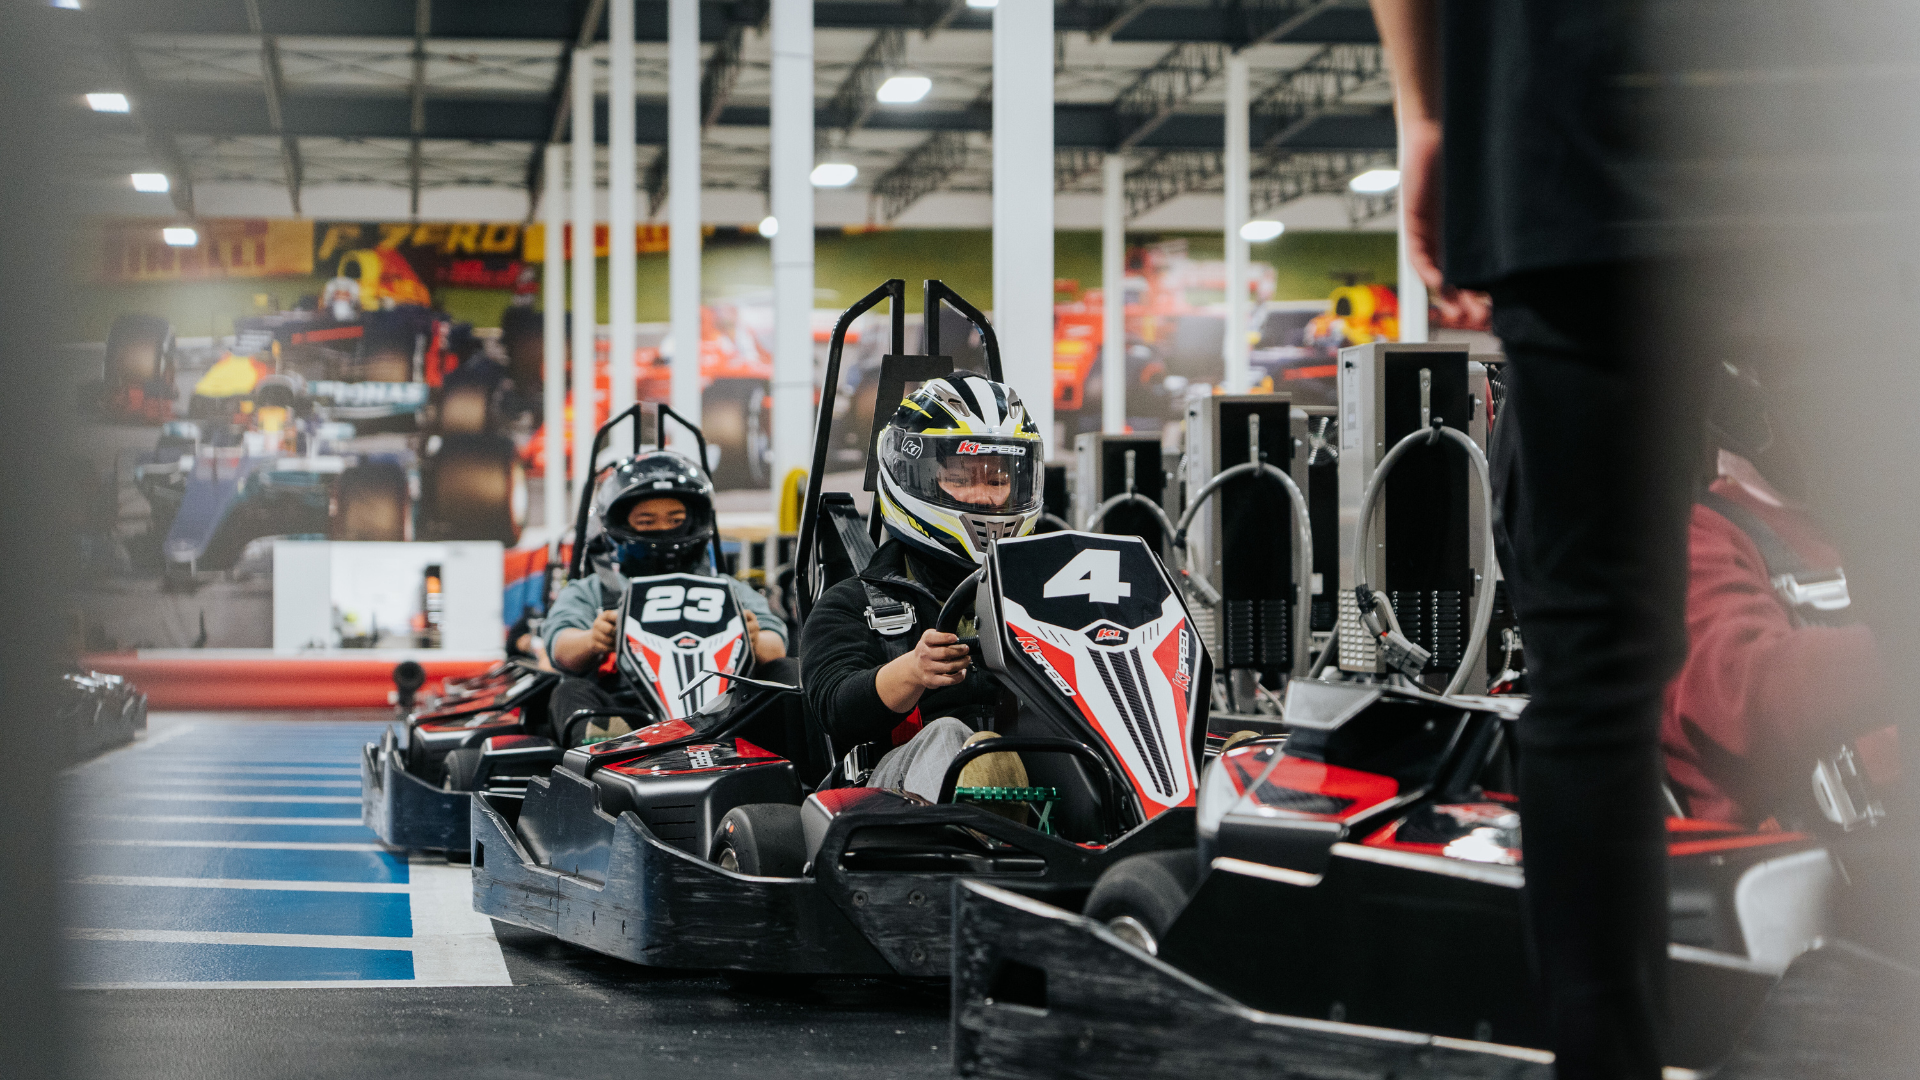 Go-Kart Racing 101: A Beginner's Guide to Getting Started